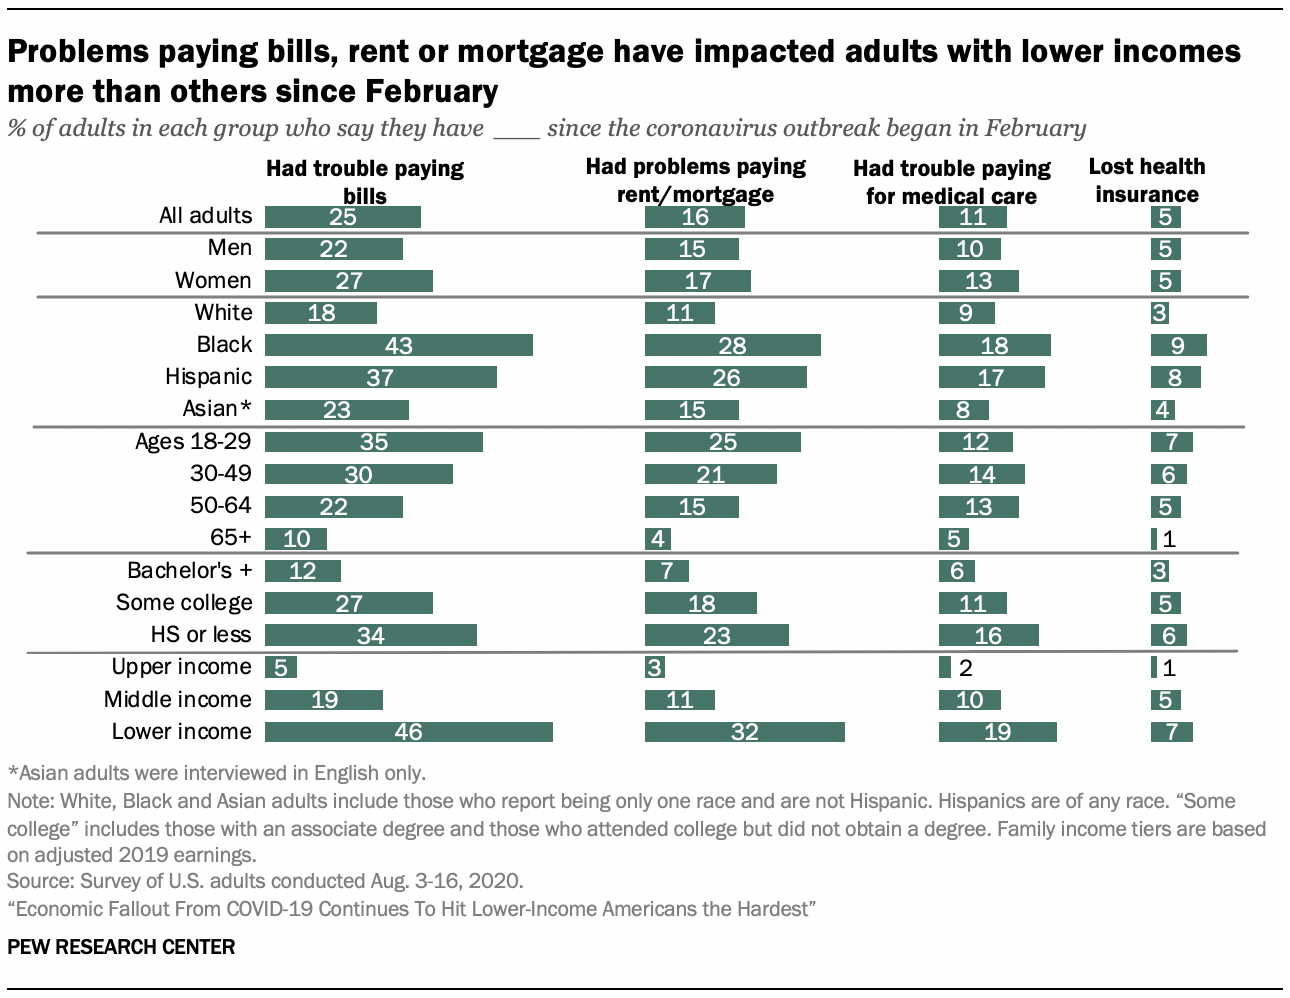 Problems paying bills, rent or mortgage have impacted adults with lower incomes more than others since February